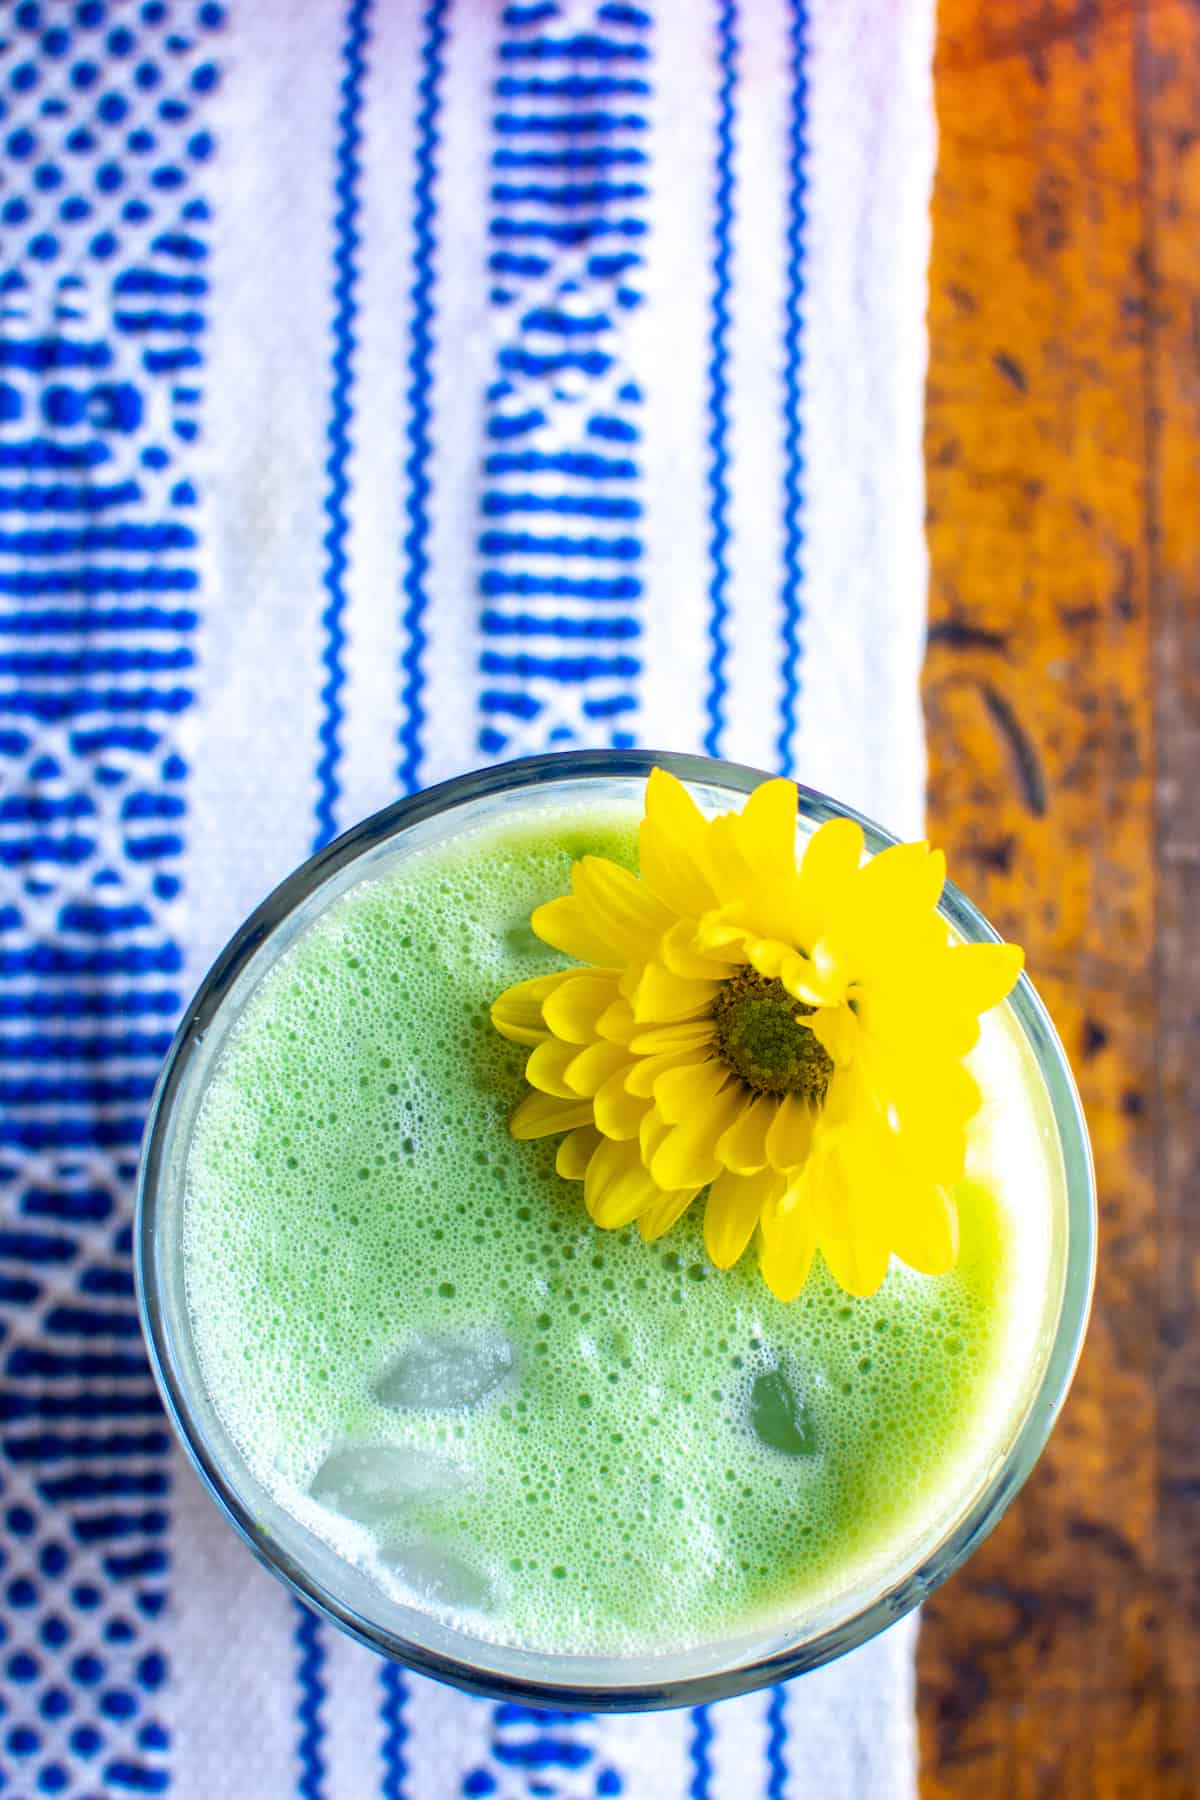 A glass of green Matcha Horchata with a yellow flower in the glass. The glass is sitting on a blue and white runner on a wood table.